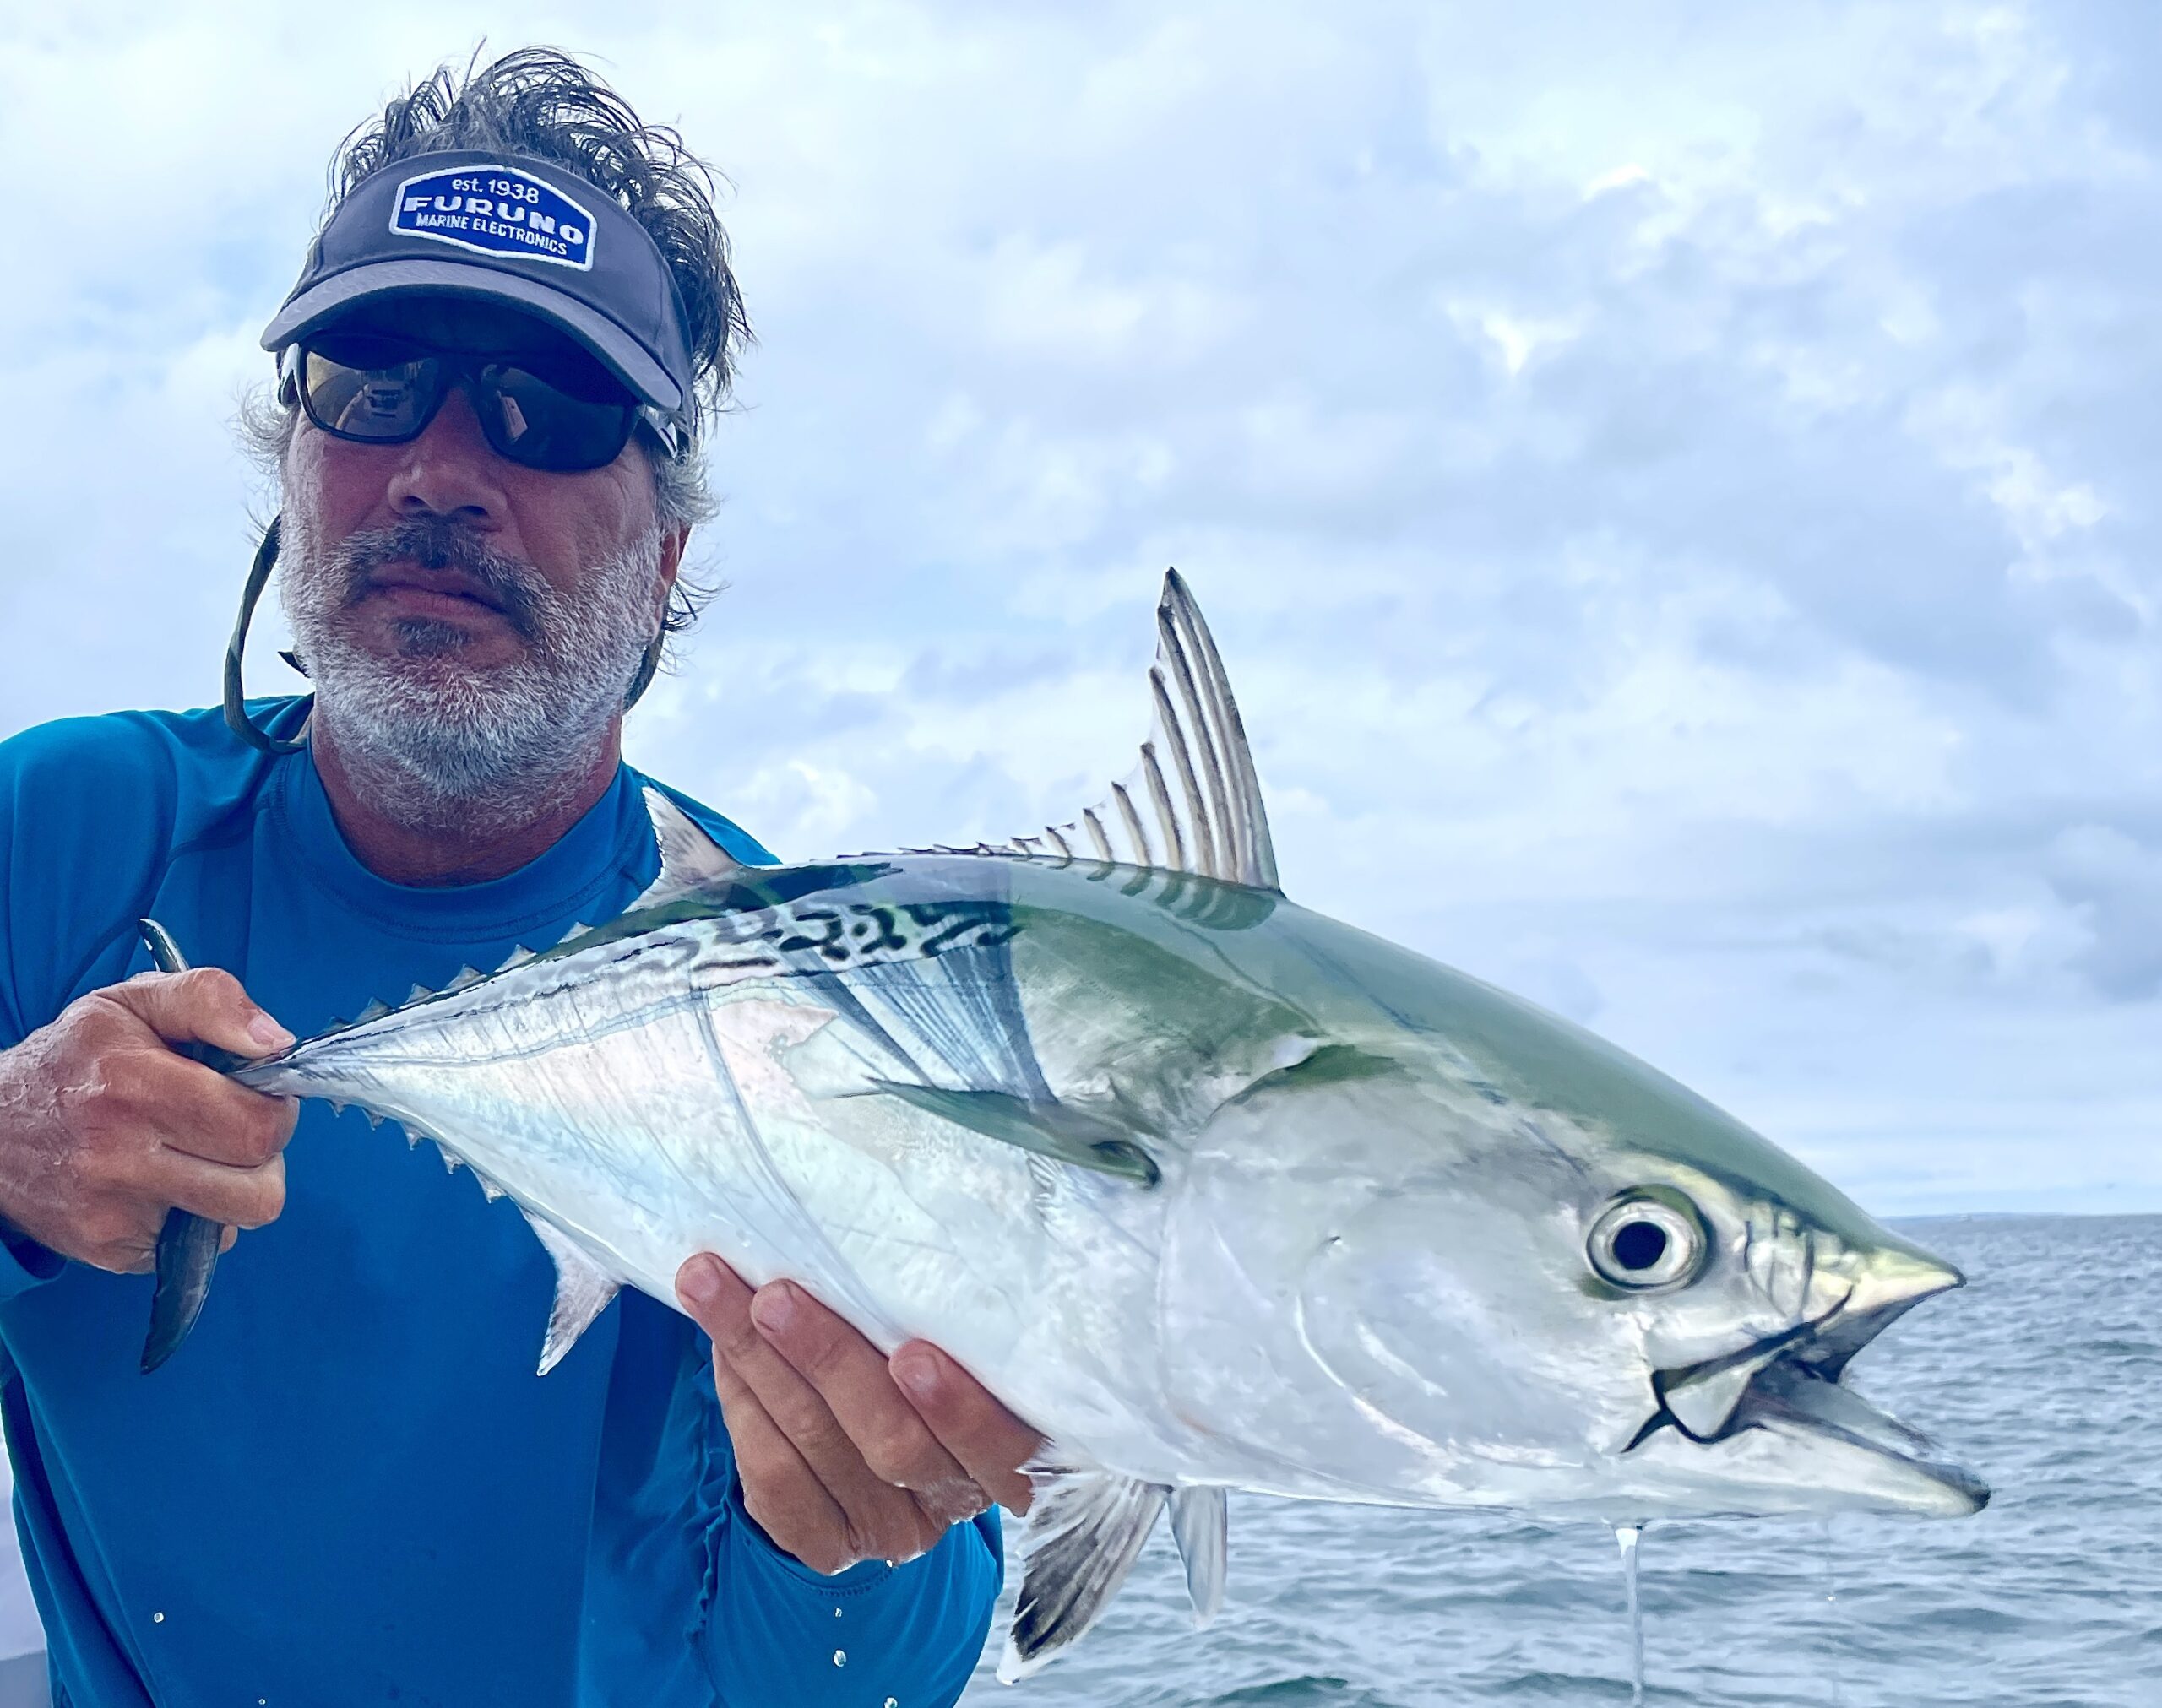 It's albie season! Light tackle anglers like Todd Richter rejoiced with the return of the tiny tuna called false albacore on Sunday.